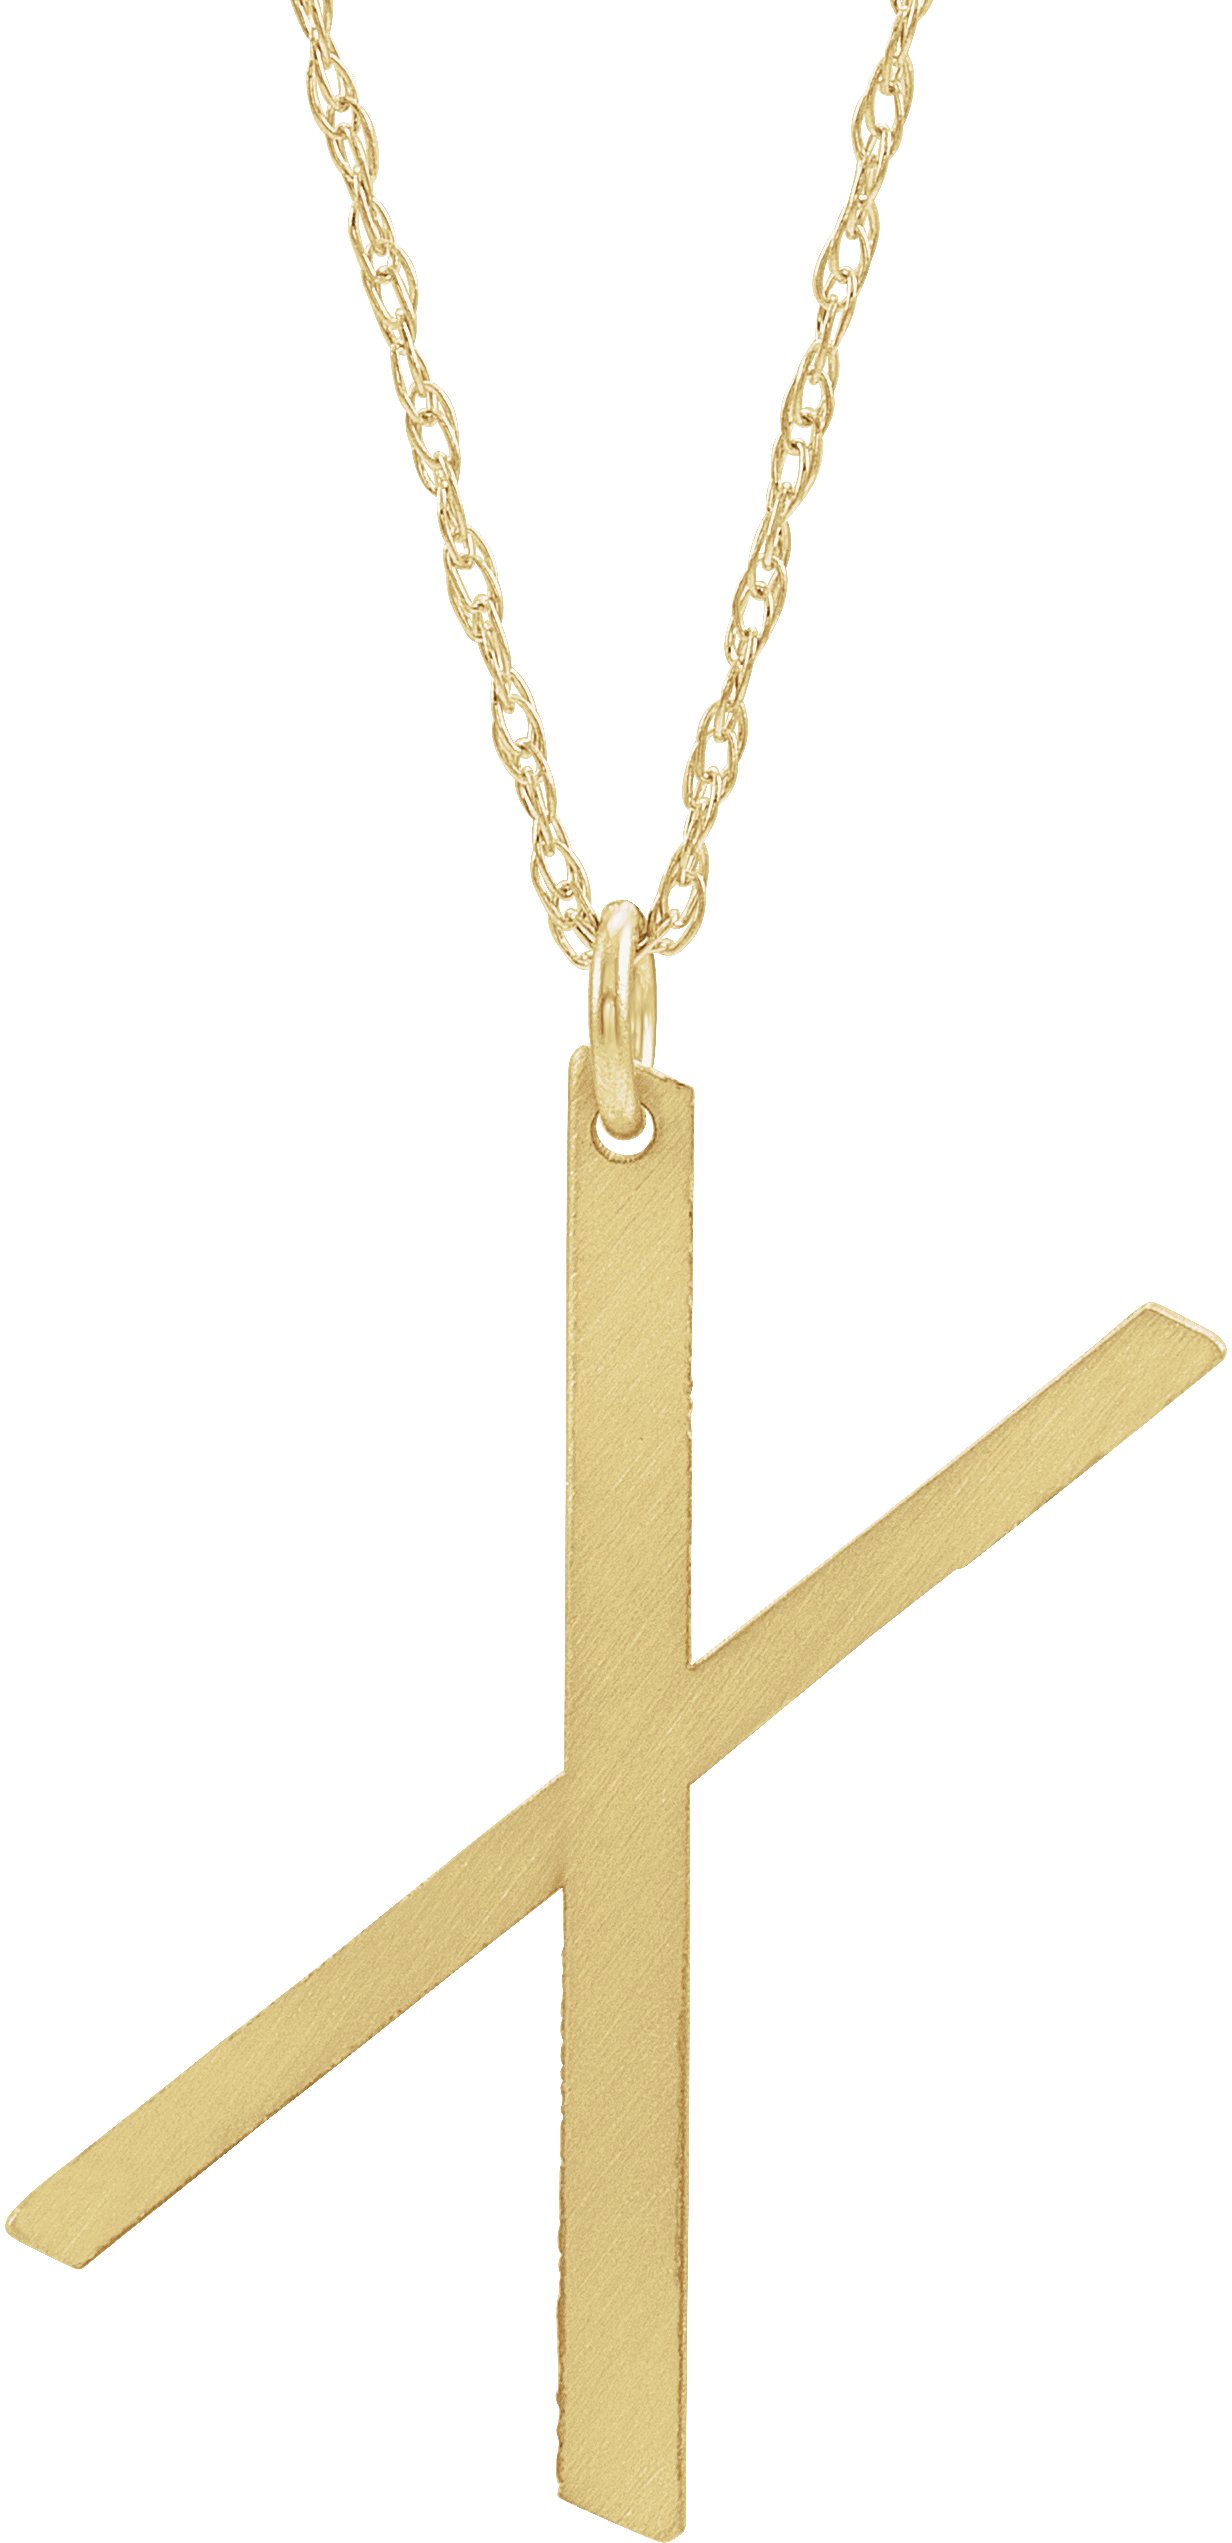 14K Yellow Gold-Plated Sterling Silver Block Initial X 16-18" Necklace with Brush Finish